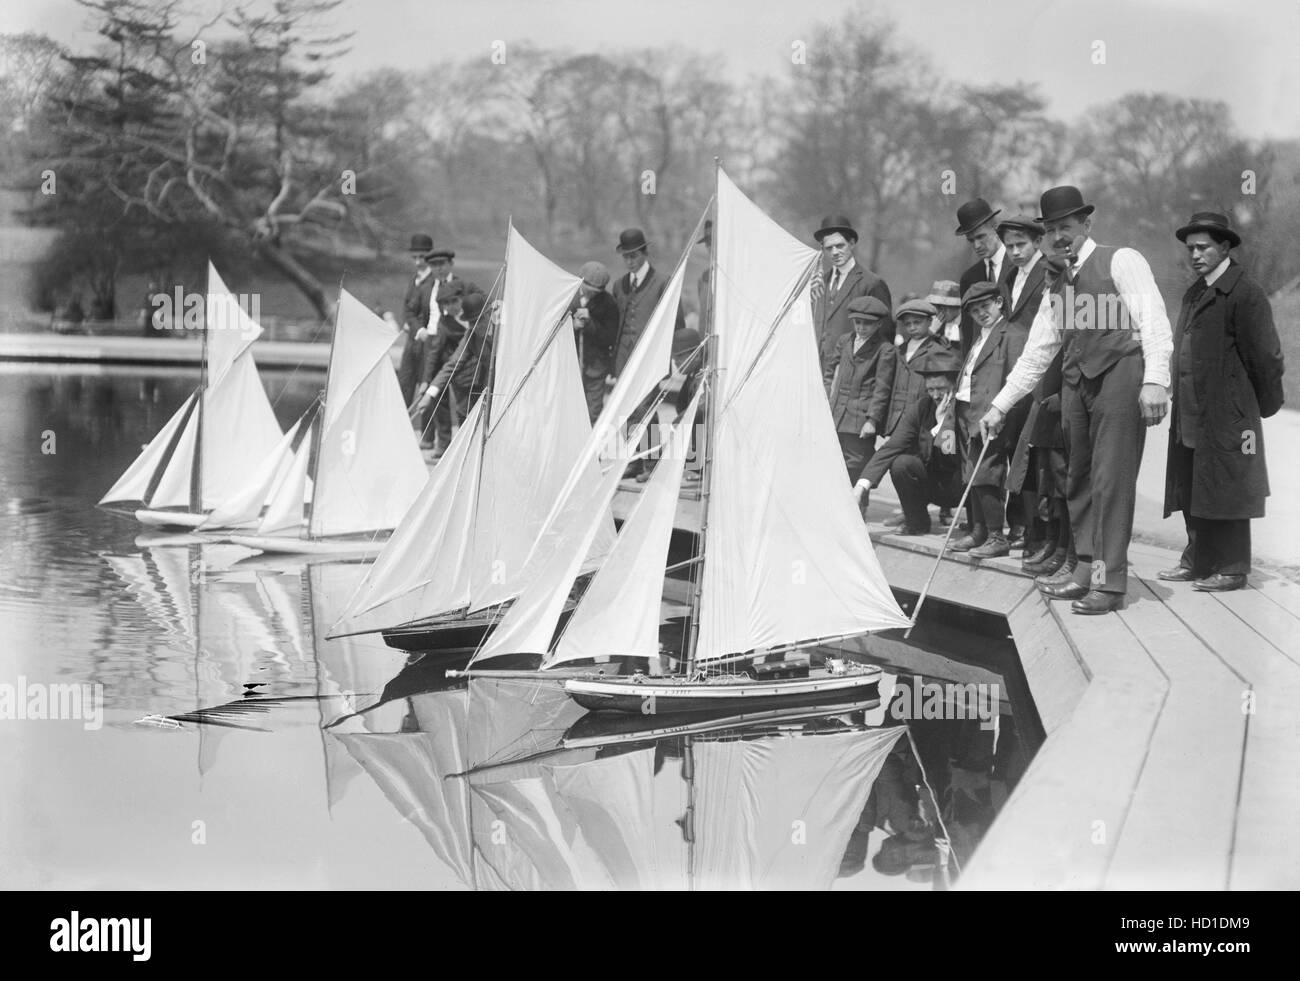 Group of People at Start of Toy Yacht Race, Conservatory Lake, Central Park, New York City, New York, USA, Bain News Service, 1915 Stock Photo